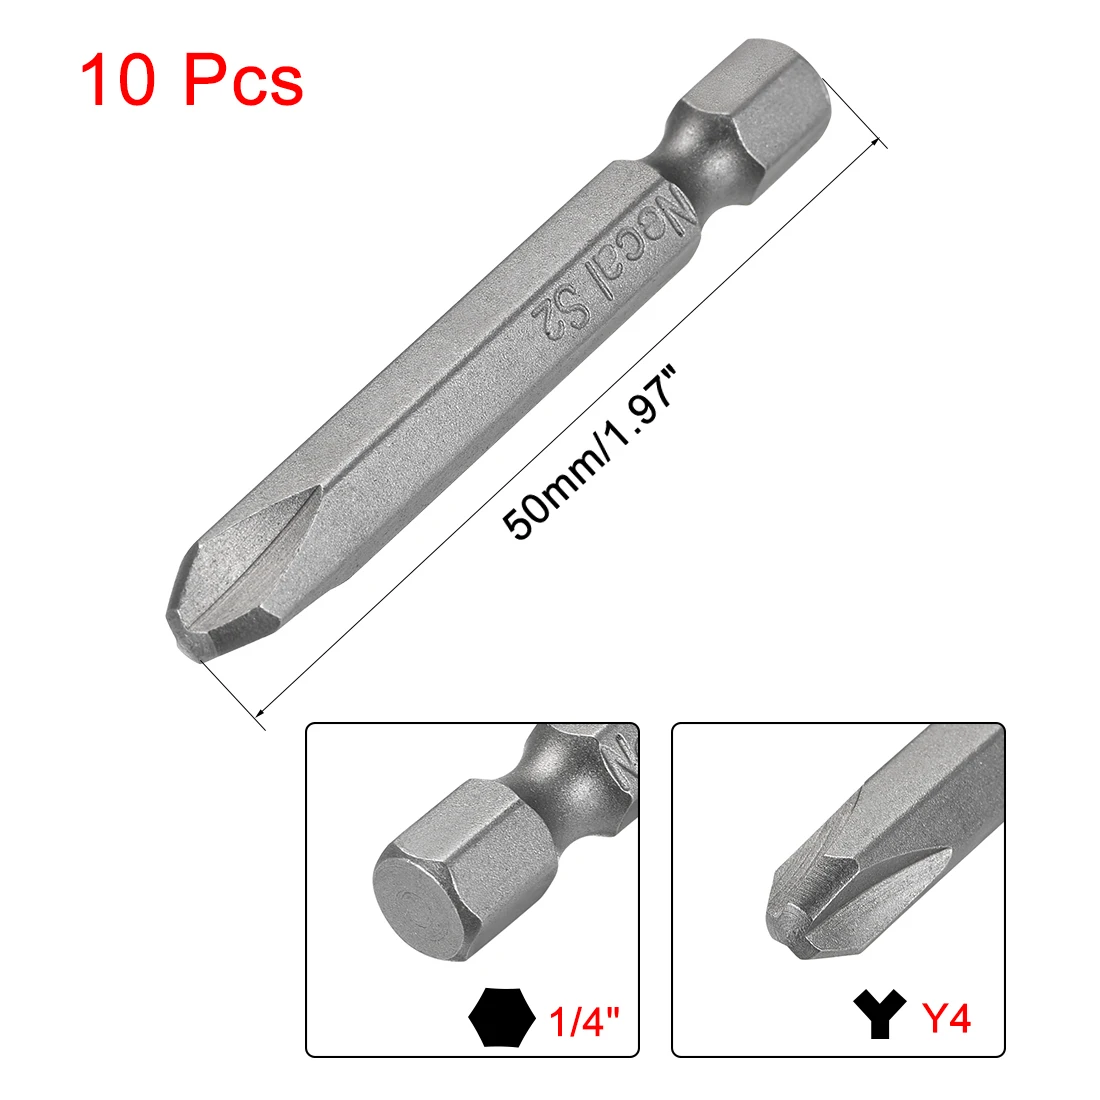 10 Pcs Y4 Magnetic Tri-Wing Screwdriver Bits 1/4 Inch Hex Shank 1.97" Length S2